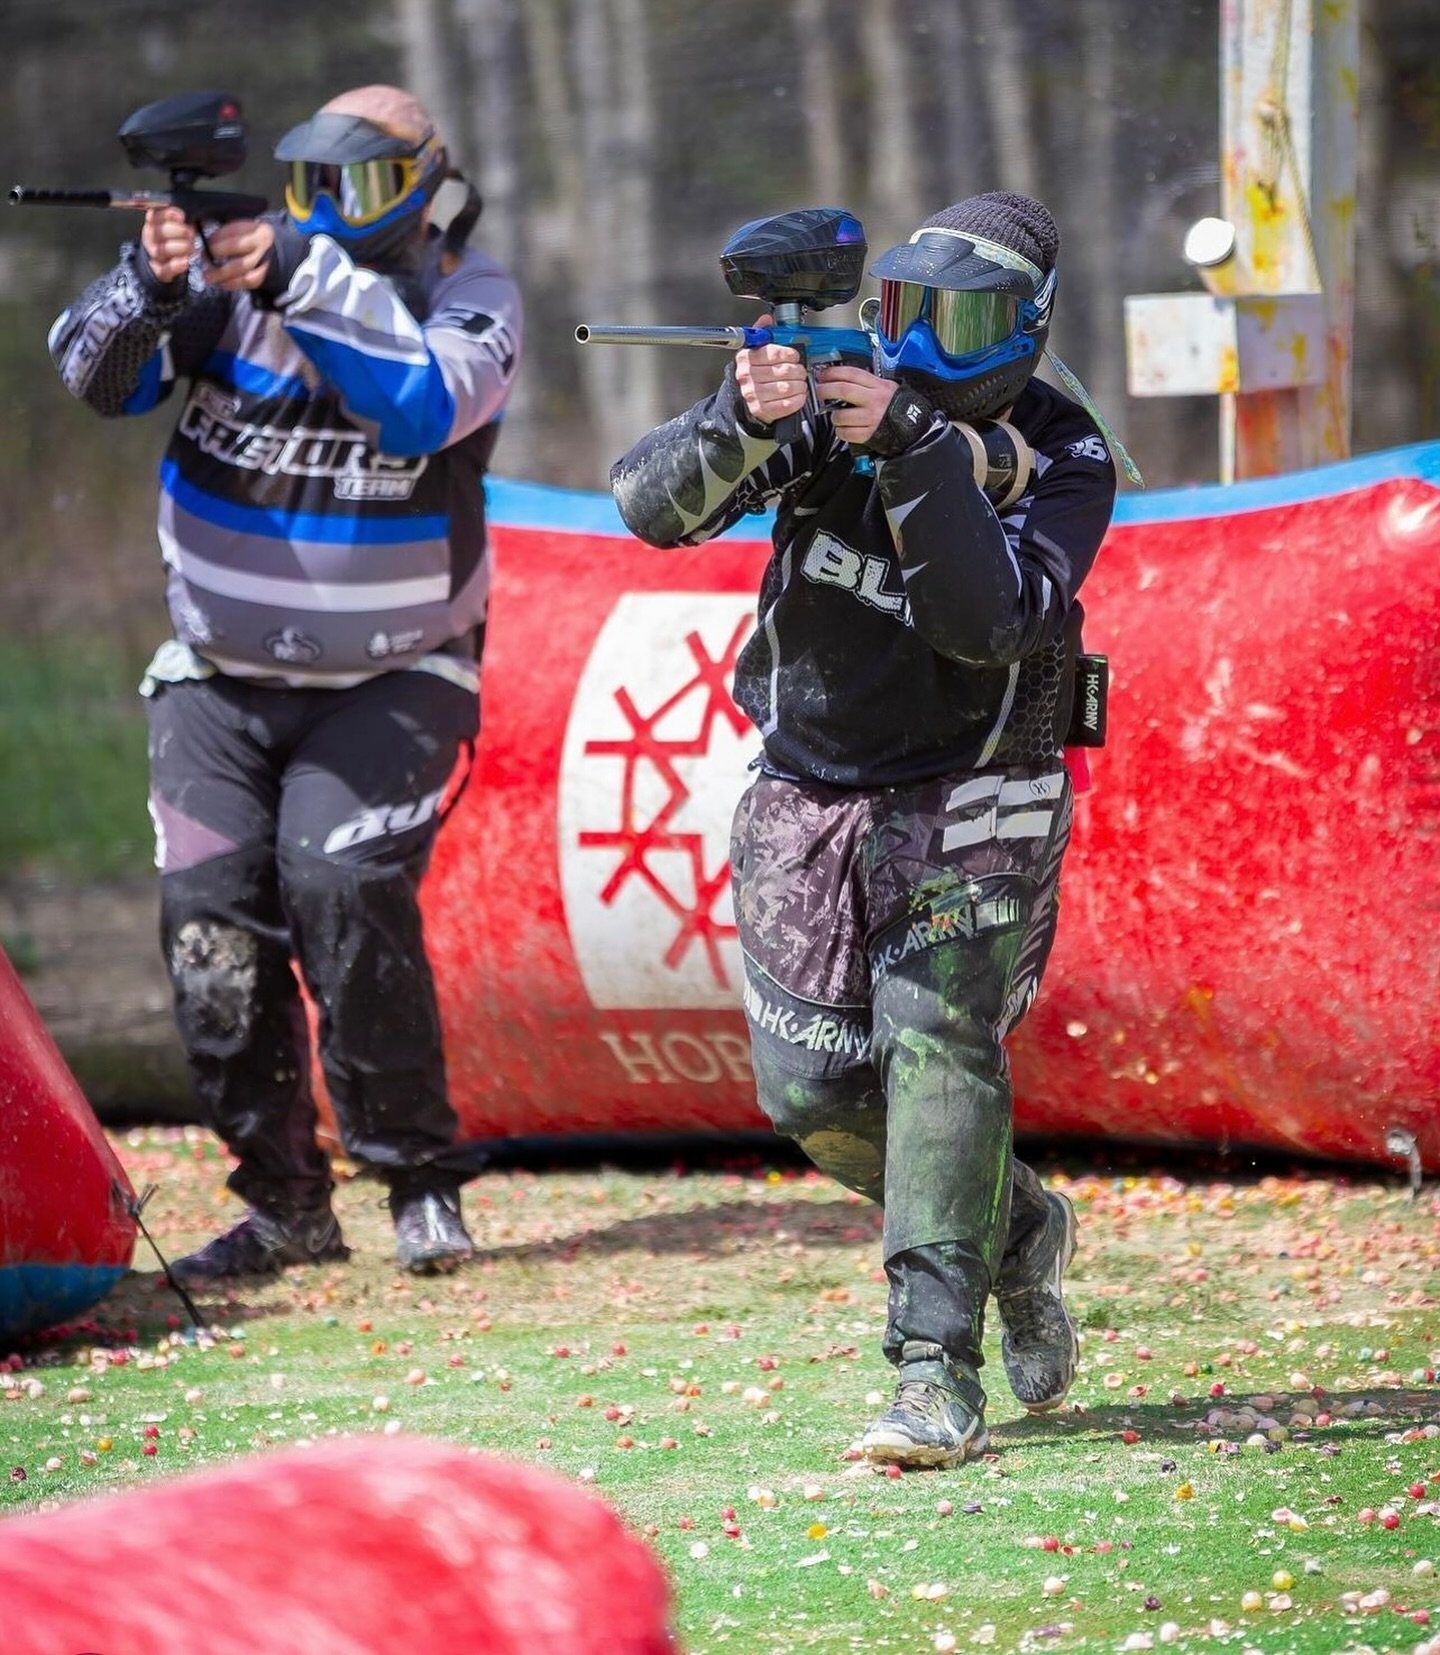 Arena is up today! Already got 10 for practice! Final practices this weekend before E2
 
 
 
 

 

#braggcreek #yyc #calgary #alberta #canada #outdoors #extremesports #paintball  #growpaintball #paintball4life #paintballing #paintballers #paintballti